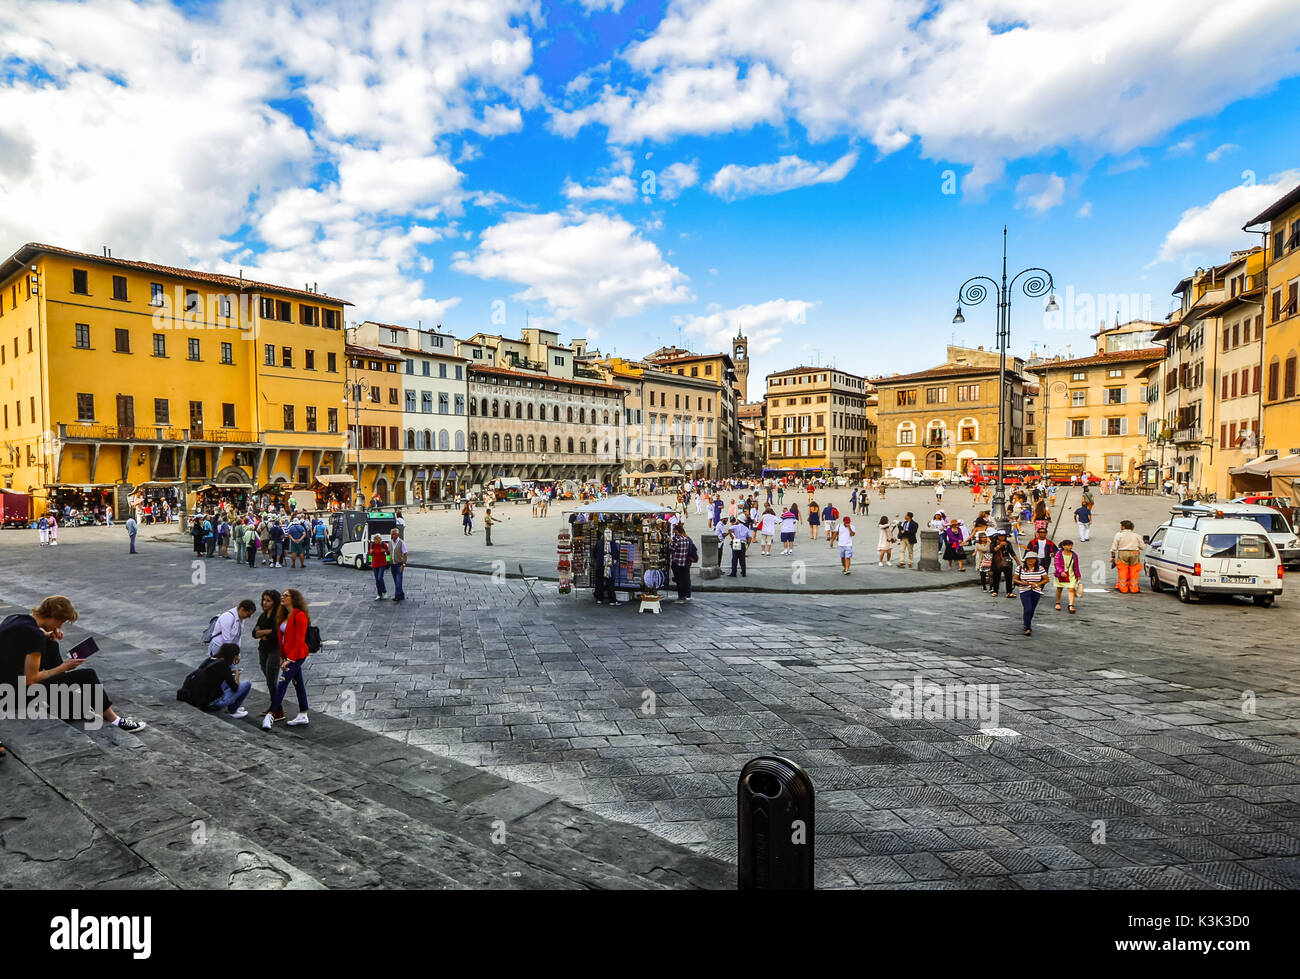 The piazza Santa Croce in Florence Italy taken from the steps of the Santa Croce Basilica Stock Photo